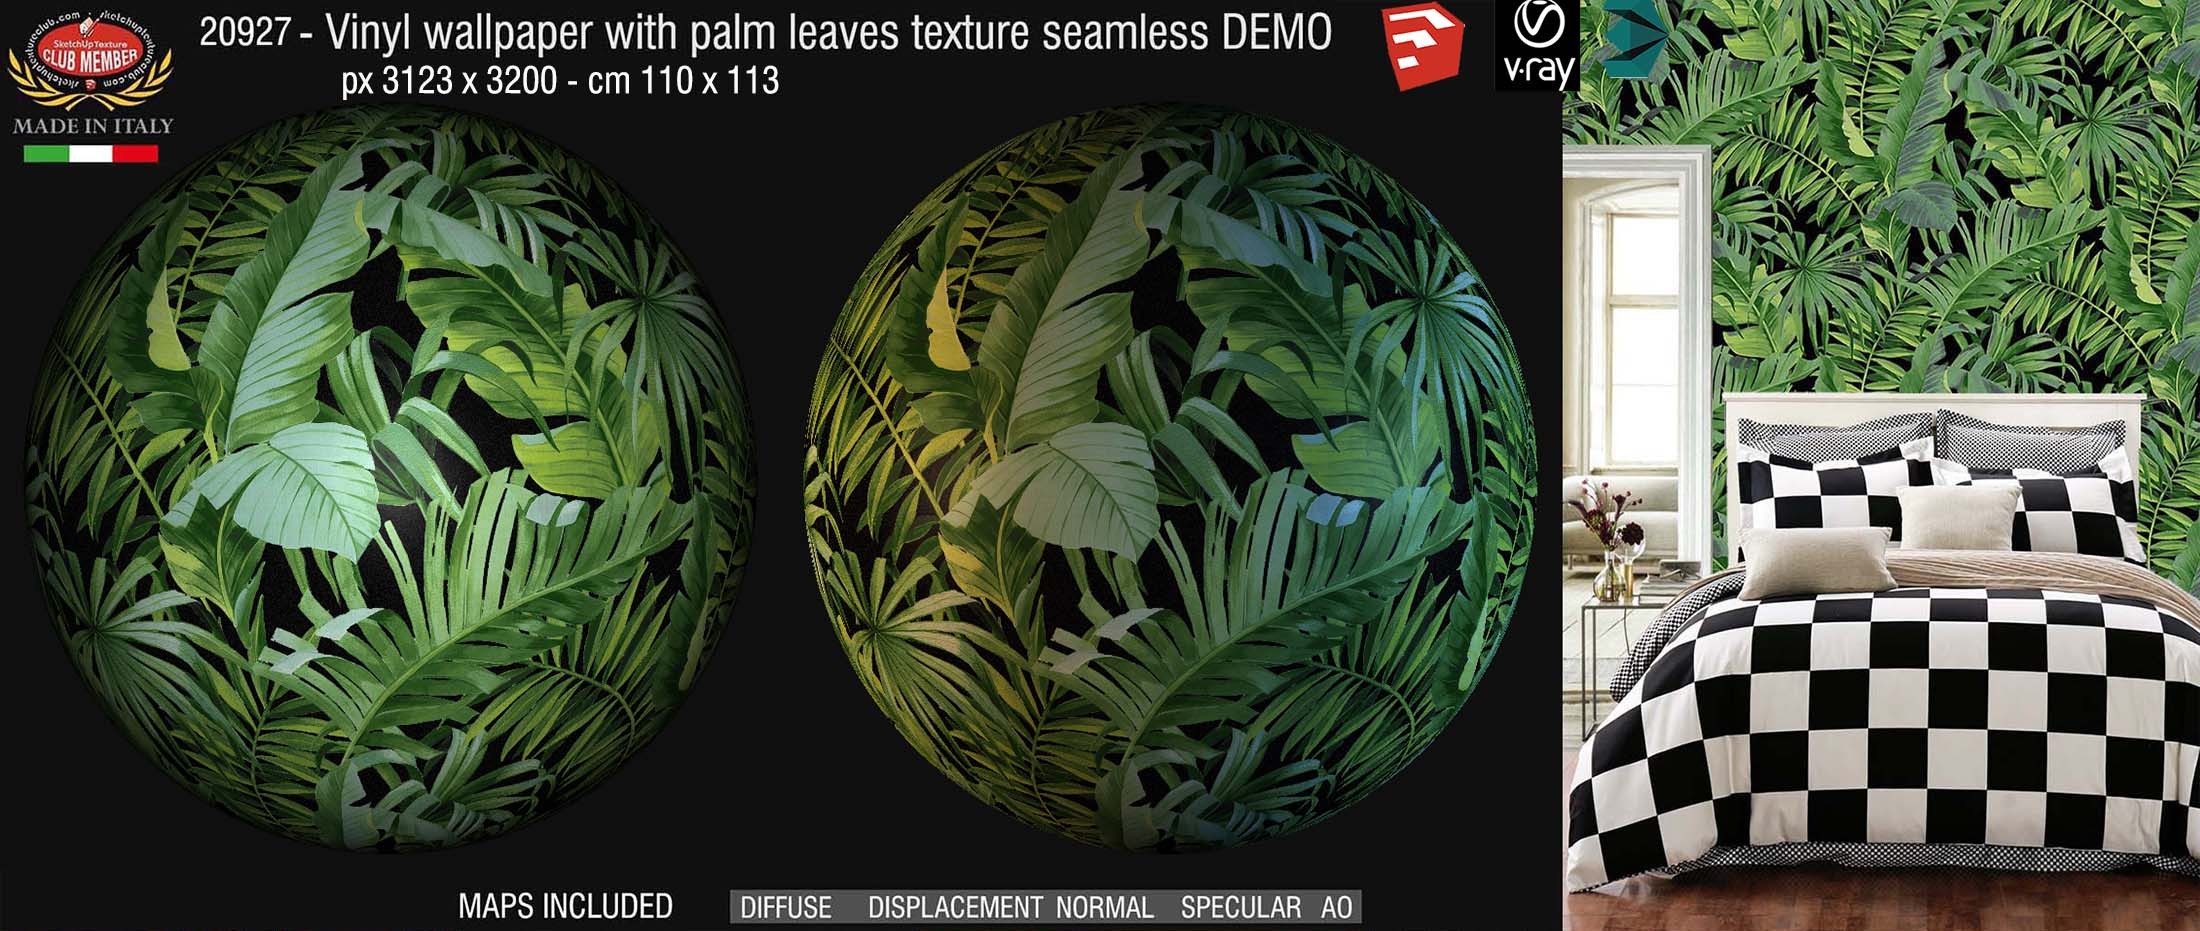 20927 Vinyl wallpaper with palm leaves PBR texture seamless DEMO